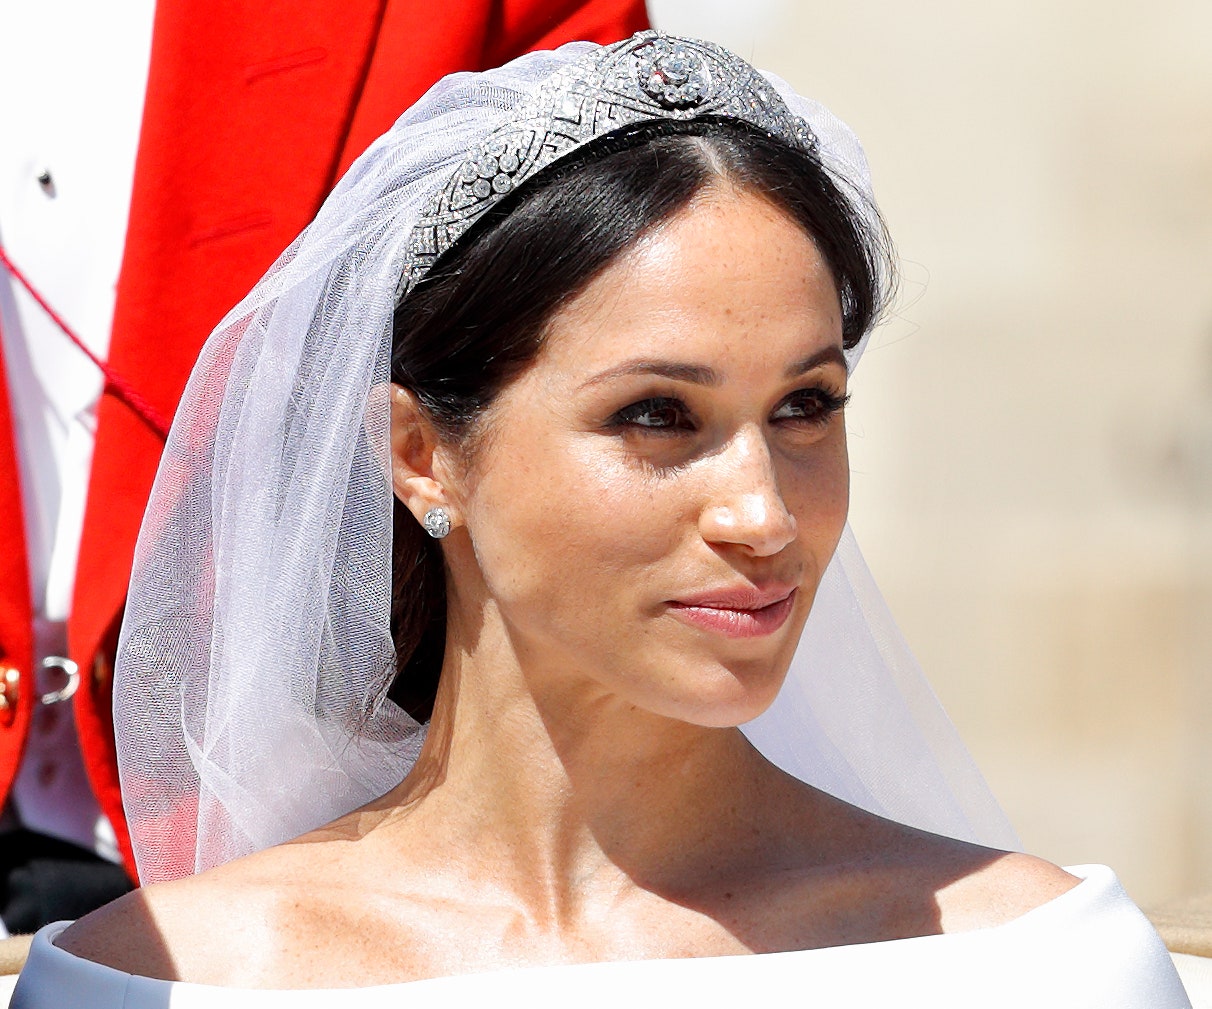 Prince Harry ‘sparked tension’ over Meghan Markle’s Wedding Tiara and The Rift Among the Royal Family.